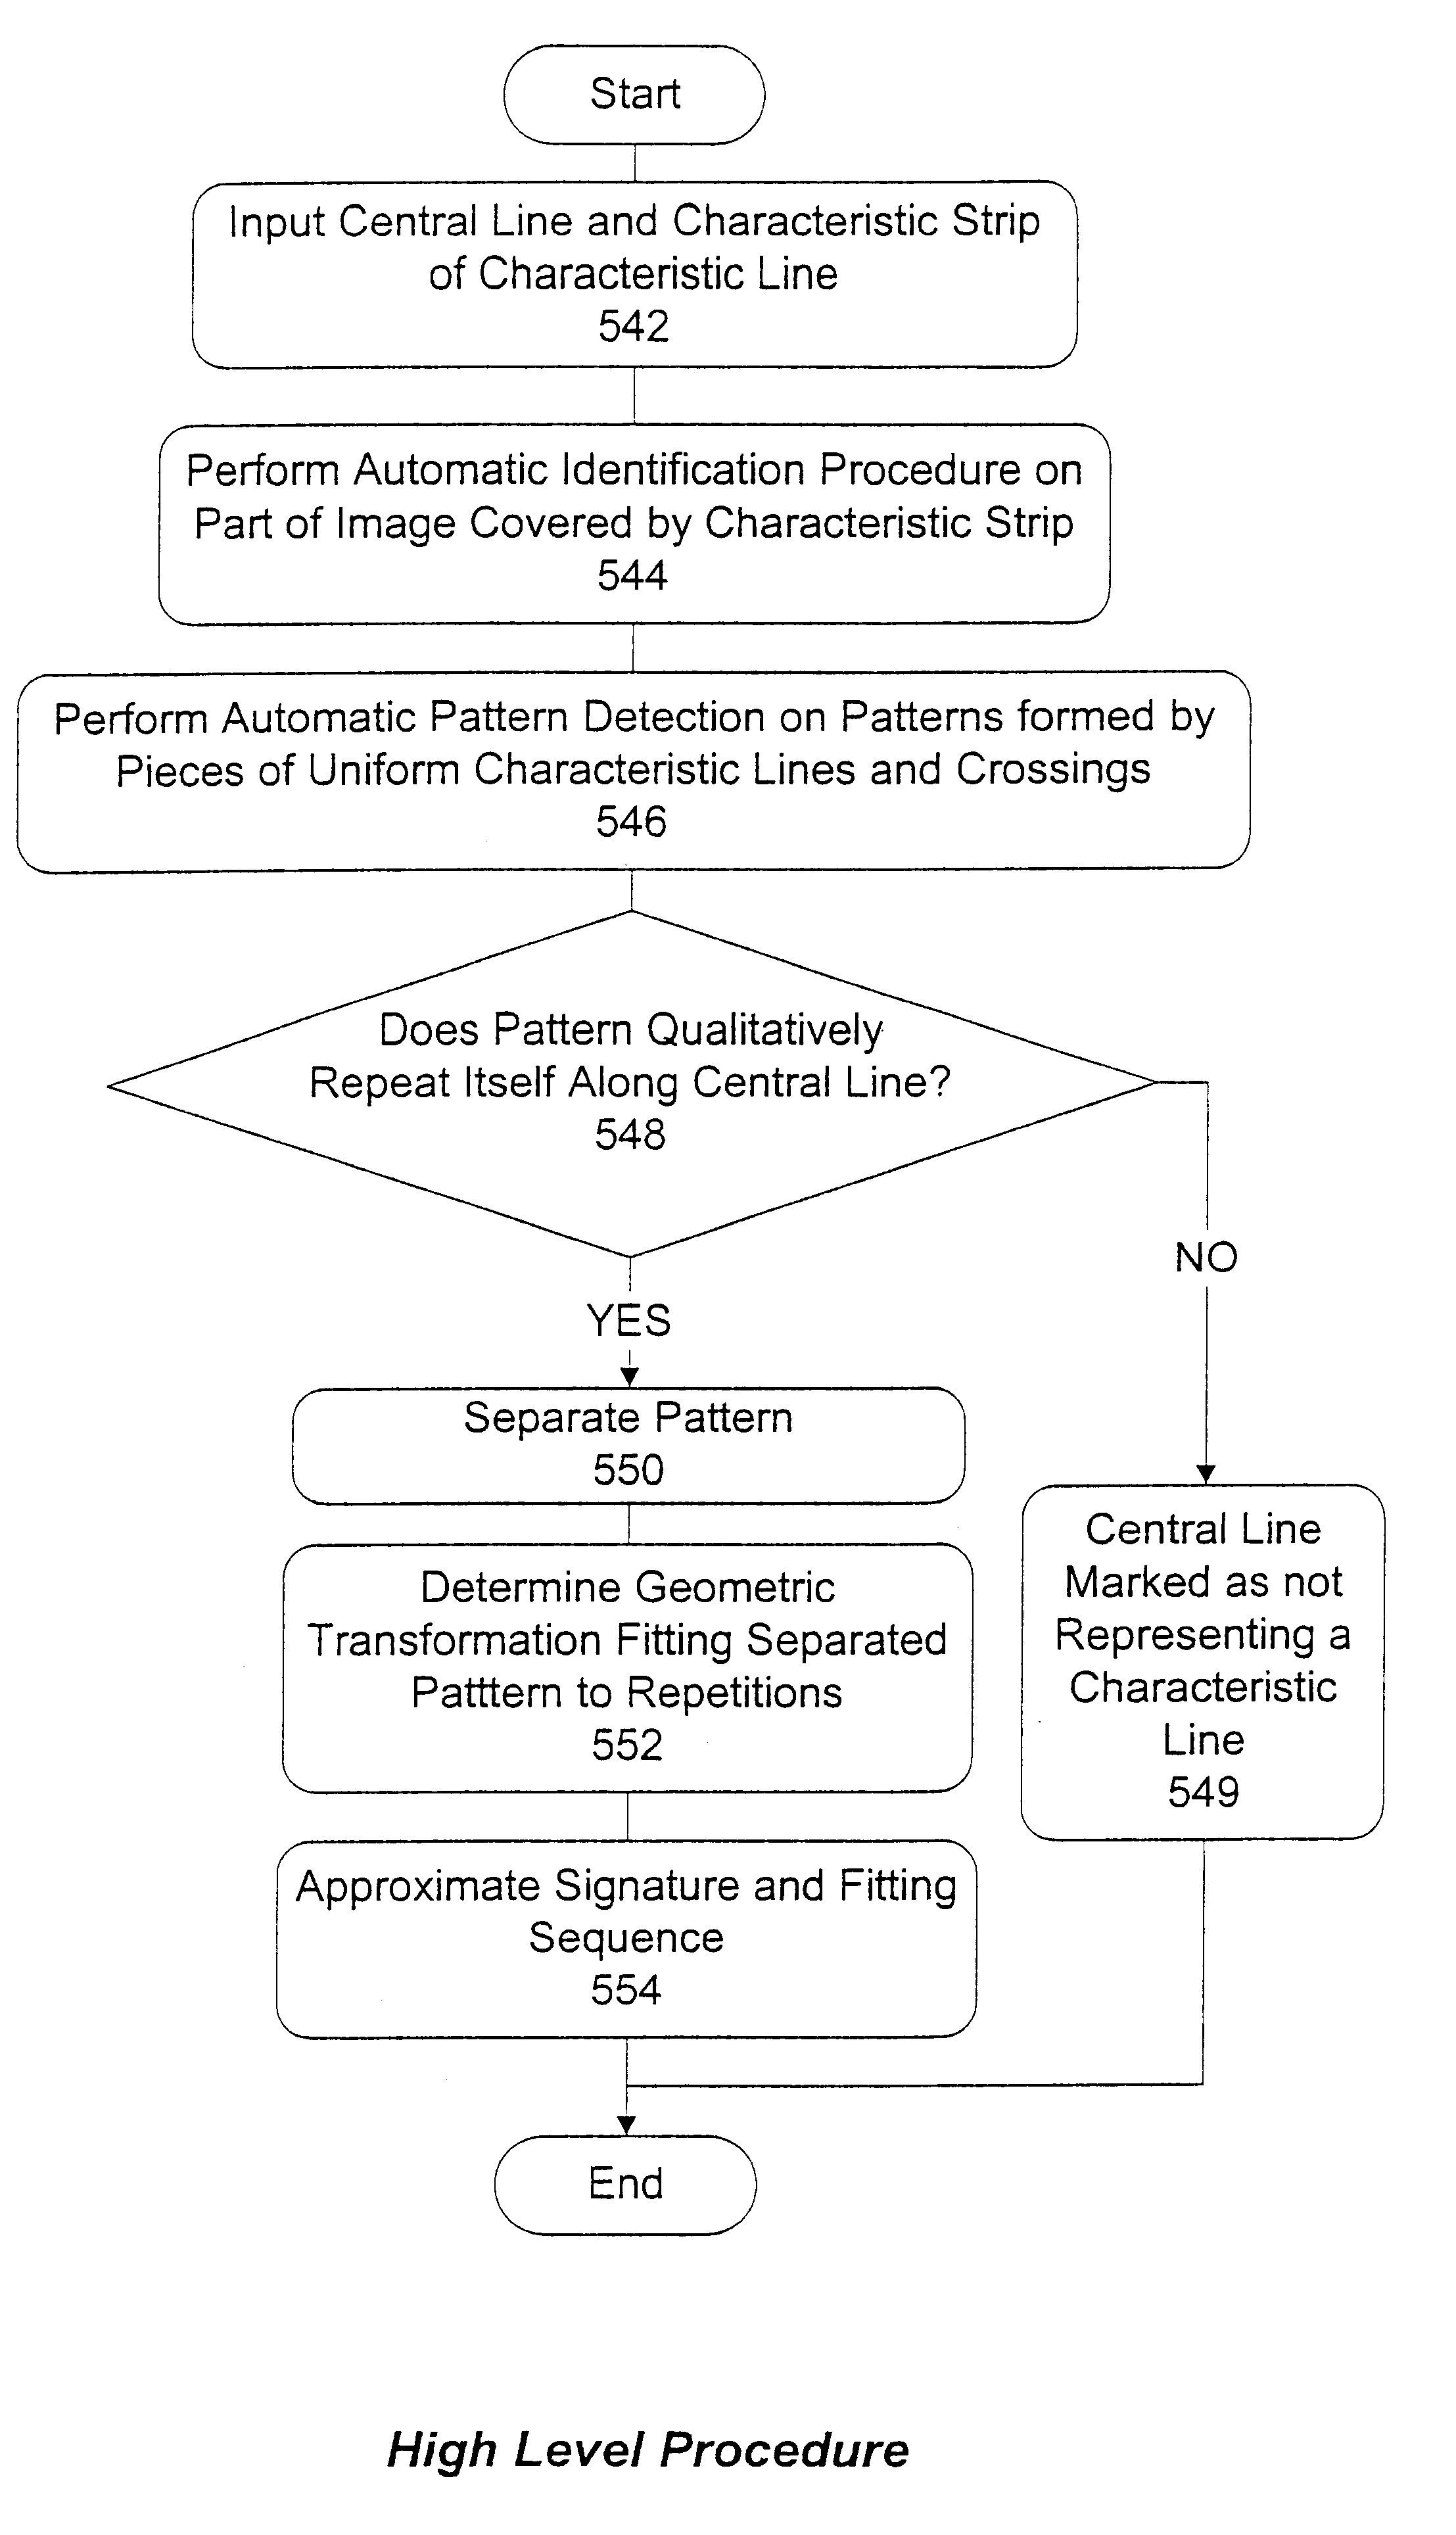 Method and apparatus for image analysis and processing by identification of characteristic lines and corresponding parameters